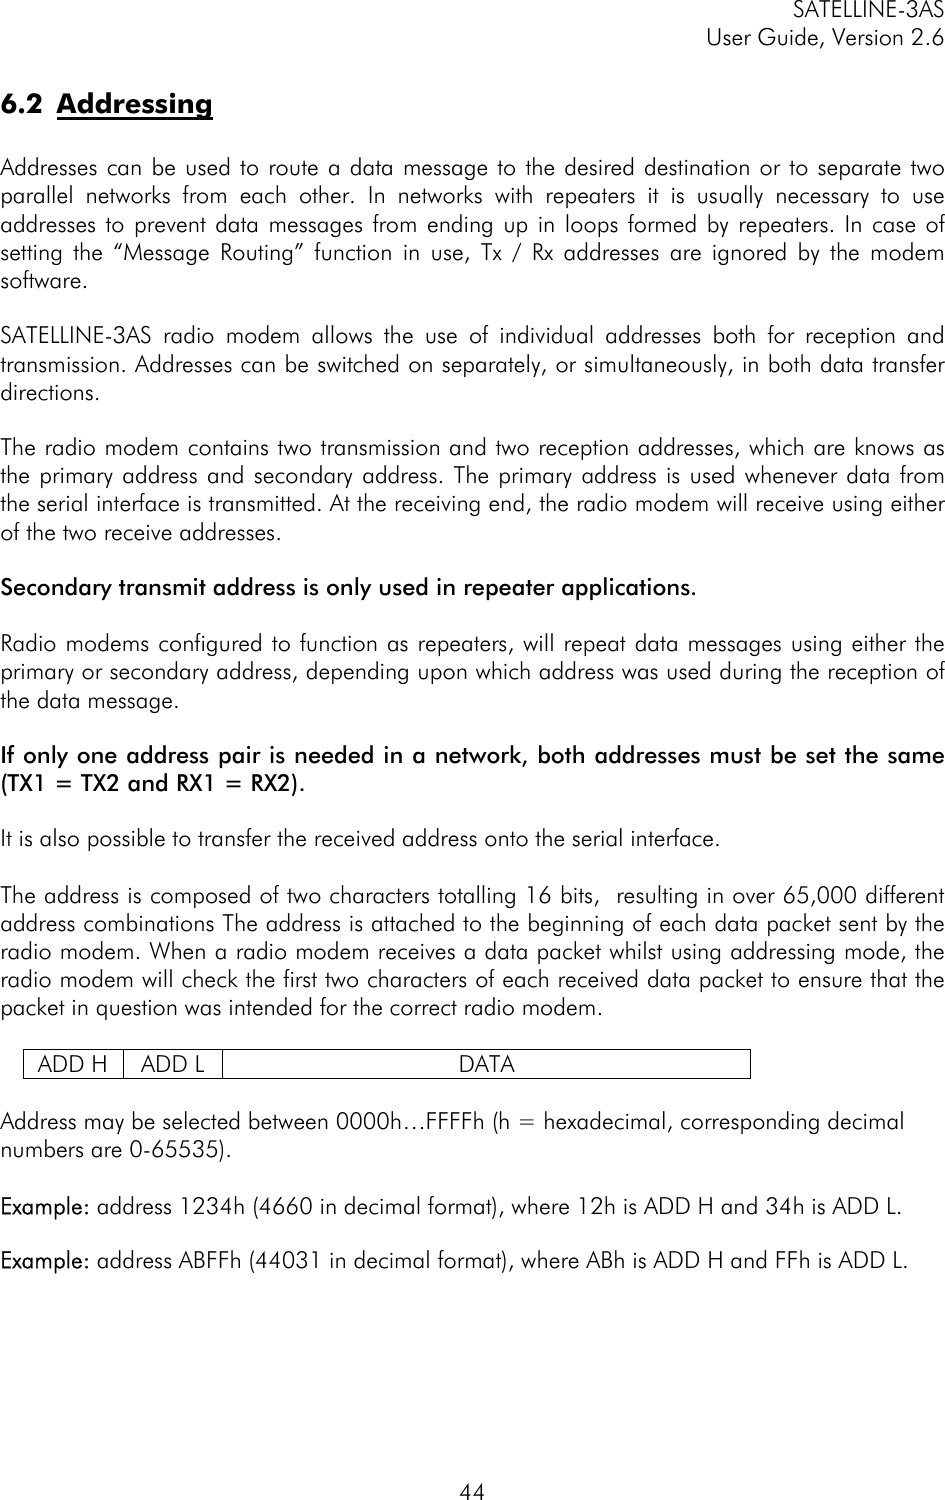 SATELLINE-3AS User Guide, Version 2.6   446.2 Addressing  Addresses can be used to route a data message to the desired destination or to separate two parallel networks from each other. In networks with repeaters it is usually necessary to use addresses to prevent data messages from ending up in loops formed by repeaters. In case of setting the “Message Routing” function in use, Tx / Rx addresses are ignored by the modem software.   SATELLINE-3AS radio modem allows the use of individual addresses both for reception and transmission. Addresses can be switched on separately, or simultaneously, in both data transfer directions.   The radio modem contains two transmission and two reception addresses, which are knows as the primary address and secondary address. The primary address is used whenever data from the serial interface is transmitted. At the receiving end, the radio modem will receive using either of the two receive addresses.   Secondary transmit address is only used in repeater applications.  Radio modems configured to function as repeaters, will repeat data messages using either the primary or secondary address, depending upon which address was used during the reception of the data message.   If only one address pair is needed in a network, both addresses must be set the same (TX1 = TX2 and RX1 = RX2).   It is also possible to transfer the received address onto the serial interface.  The address is composed of two characters totalling 16 bits,  resulting in over 65,000 different address combinations The address is attached to the beginning of each data packet sent by the radio modem. When a radio modem receives a data packet whilst using addressing mode, the radio modem will check the first two characters of each received data packet to ensure that the packet in question was intended for the correct radio modem.   ADD H  ADD L  DATA  Address may be selected between 0000h…FFFFh (h = hexadecimal, corresponding decimal numbers are 0-65535).   Example: address 1234h (4660 in decimal format), where 12h is ADD H and 34h is ADD L.  Example: address ABFFh (44031 in decimal format), where ABh is ADD H and FFh is ADD L. 